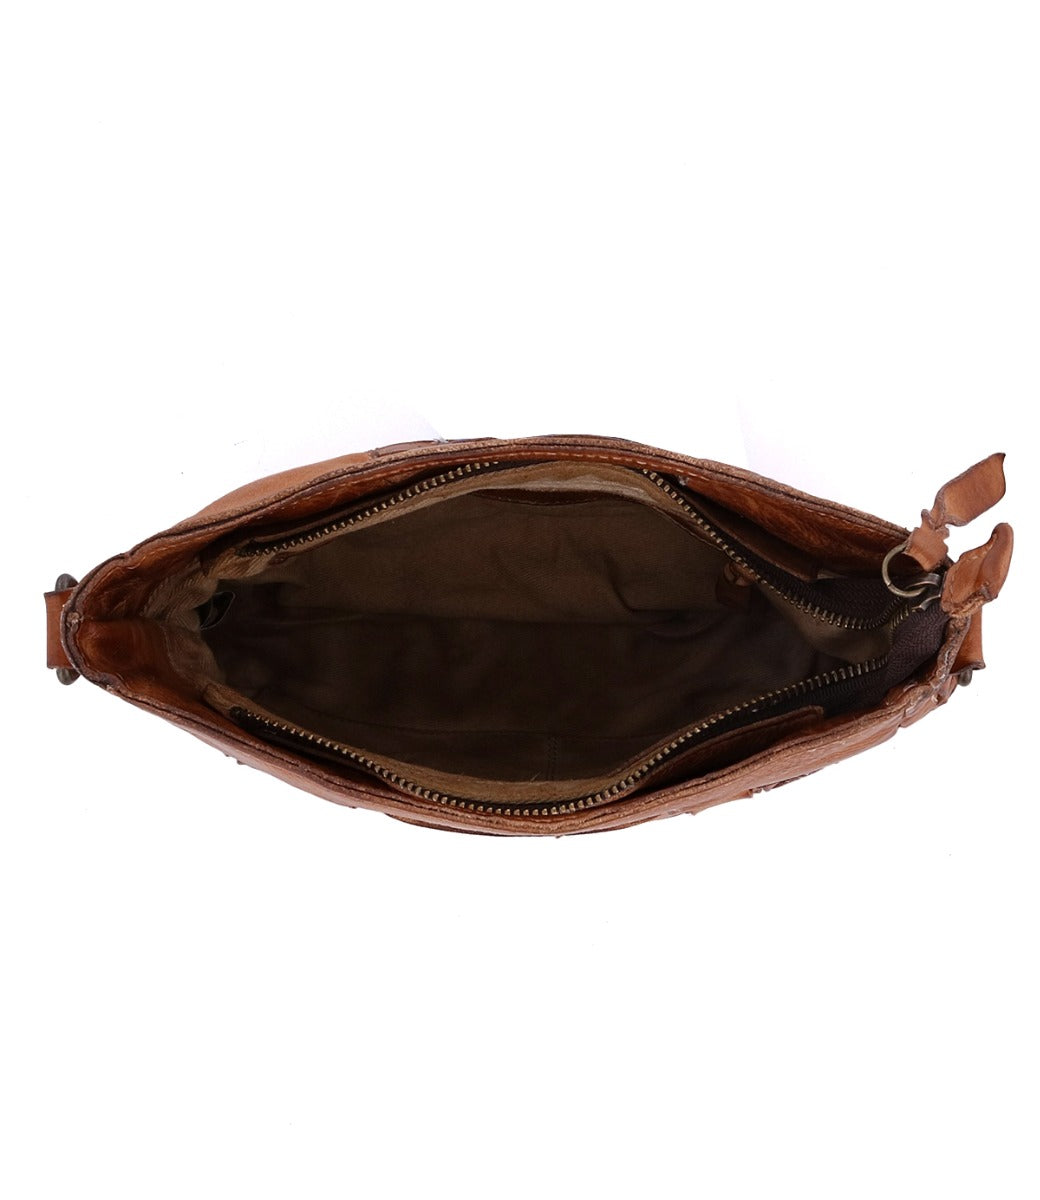 The inside of a Bed Stu Keiki brown leather bag.